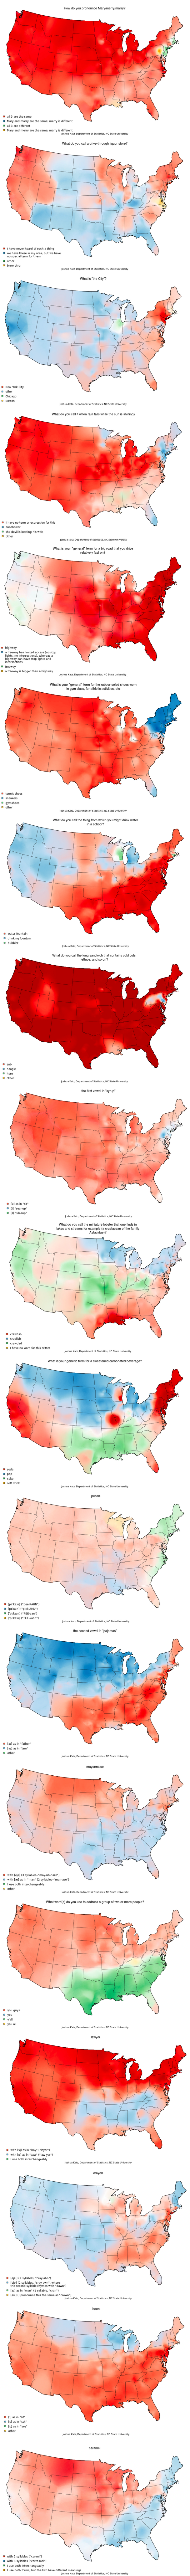 How Americans speak. .. How you address two or more people... SUP BITCHES